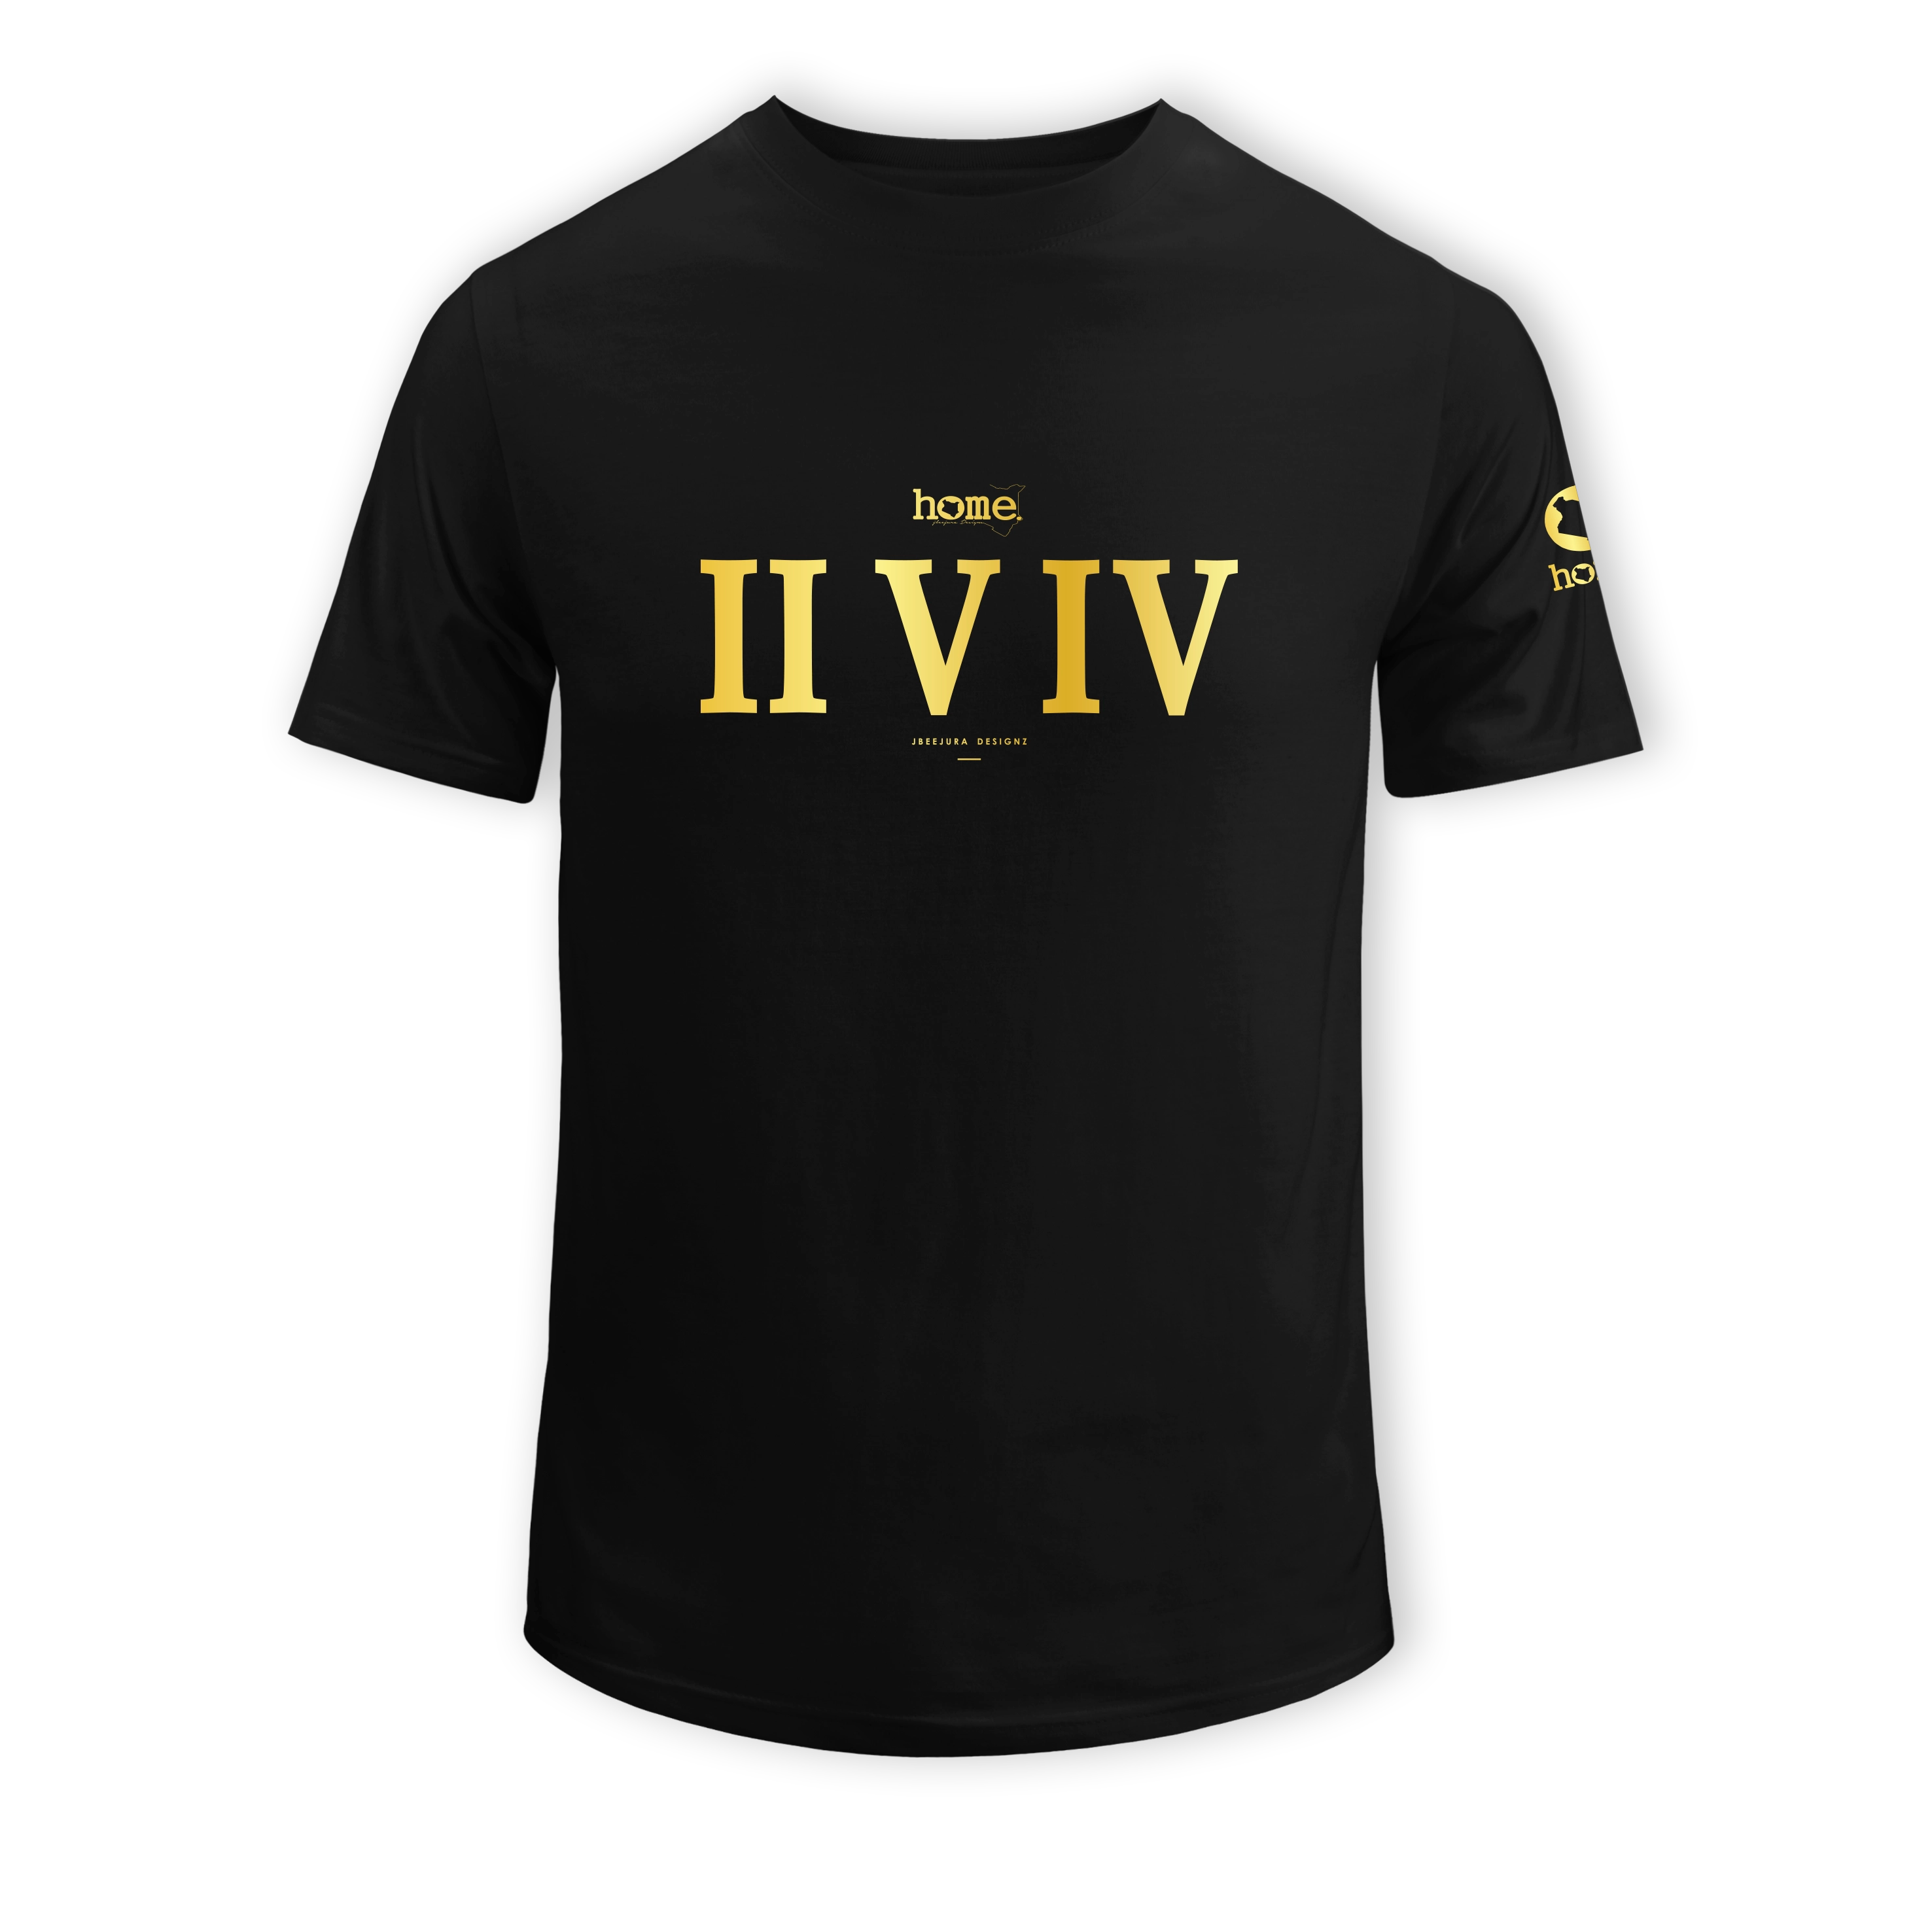 home_254 SHORT-SLEEVED BLACK T-SHIRT WITH A GOLD ROMAN NUMERALS PRINT – COTTON PLUS FABRIC